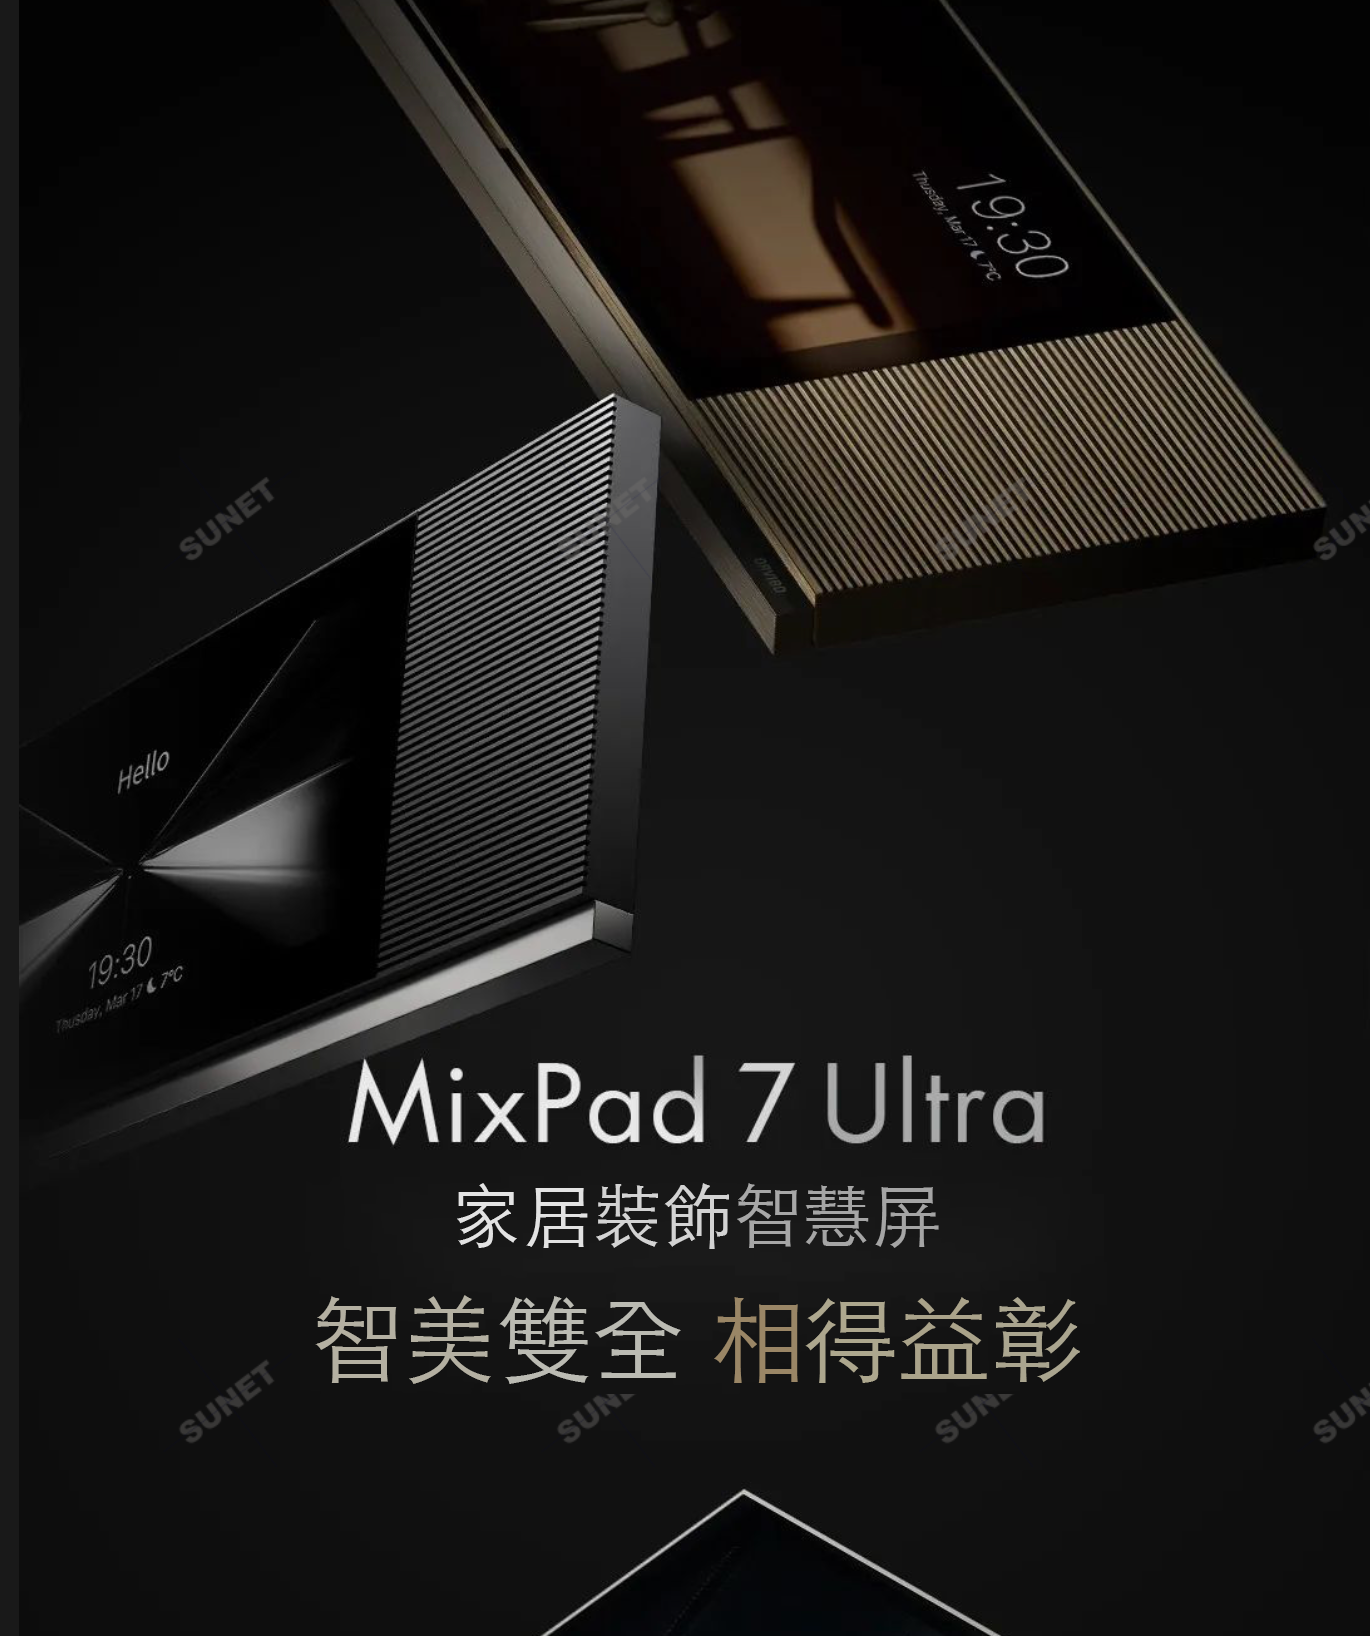 MixPad 7 Ultra家居裝飾智慧屏智美雙全 相得益彰Home decoration smart screenWisdom and beauty complement each other